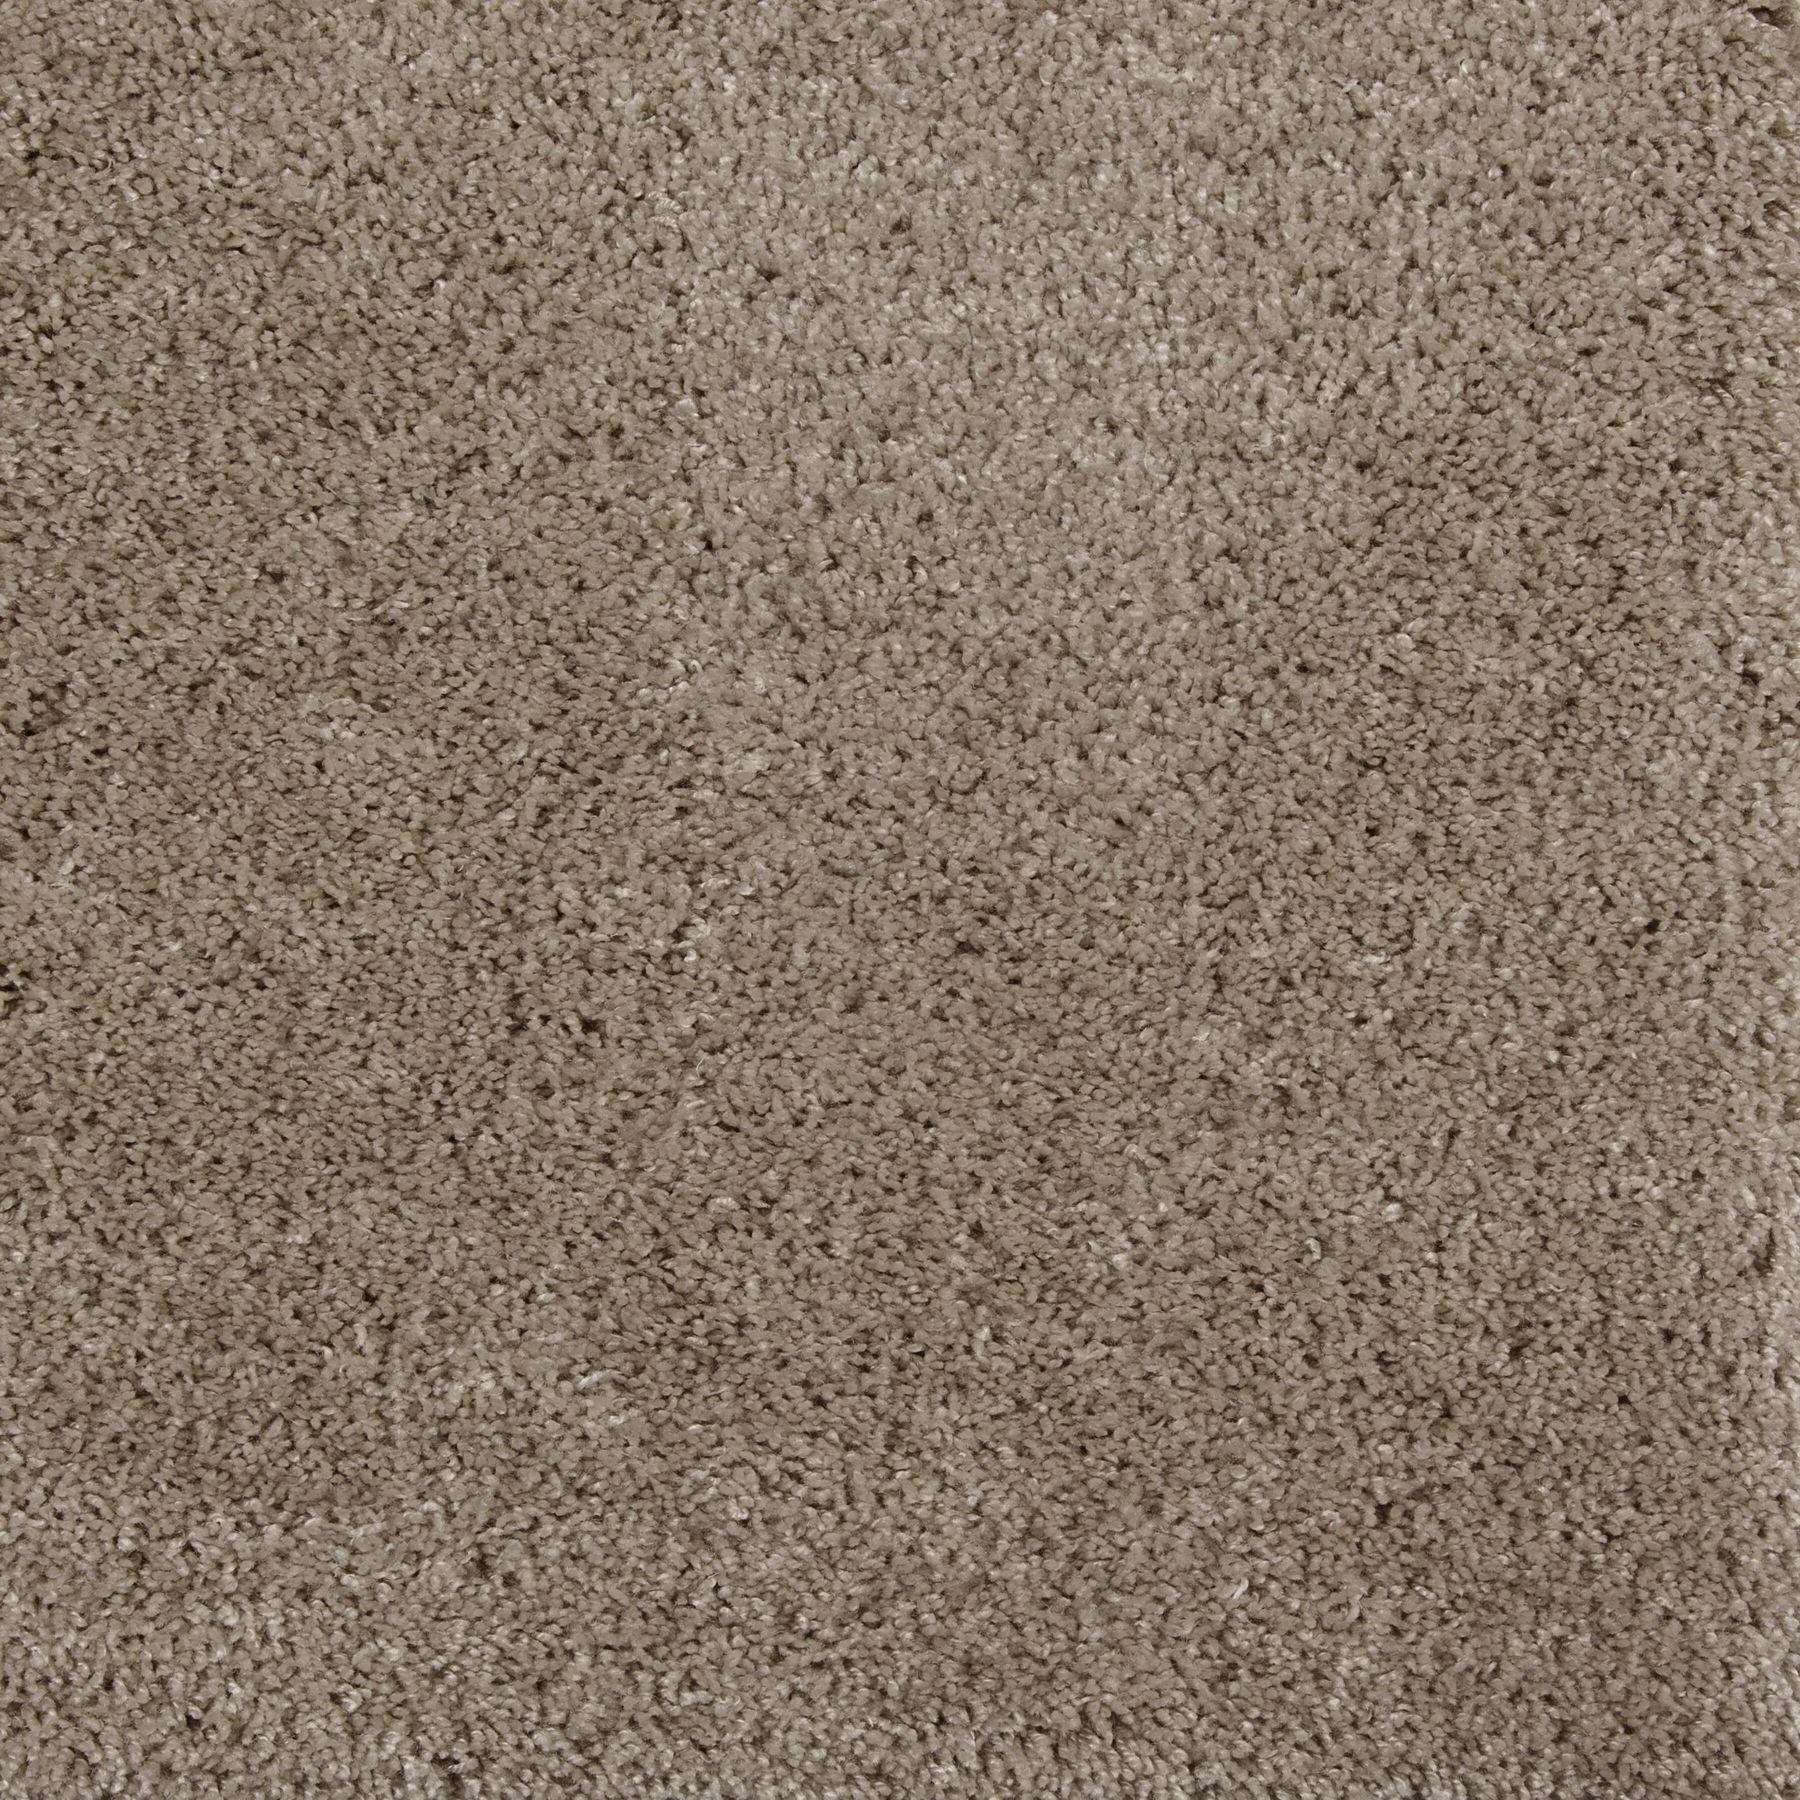 Synthetic broadloom carpet swatch in a cut pile texture in sable.